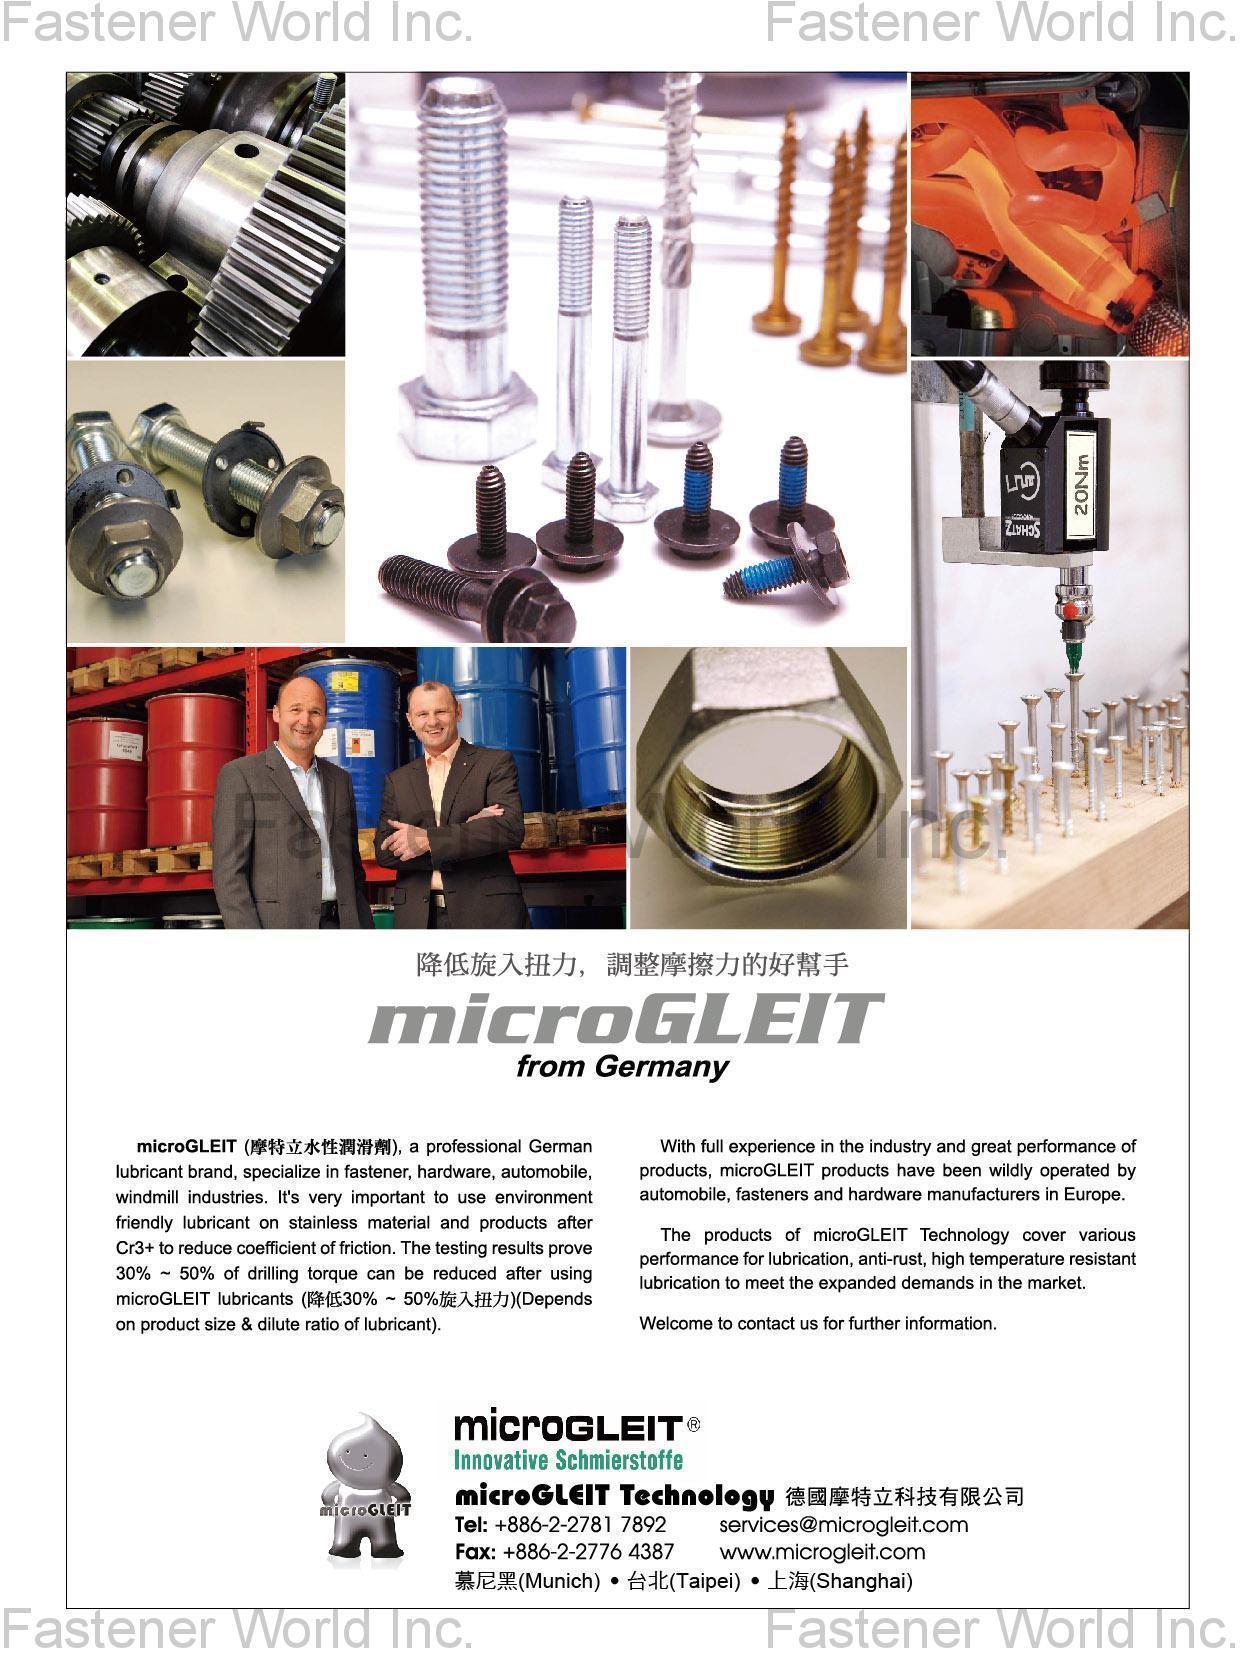 microGLEIT Technology Company  , microGLEIT, Aluminum Lubricant, Alkaline Dry Film Lubricant, Acidic Dry Film Lubricant, PTFE Lubricant, Rescue Lubricant at Assembly, Coefficient of Friction, MoS2, Aluminum bolt, TAIWAN , Oil Seals, Oil Rings